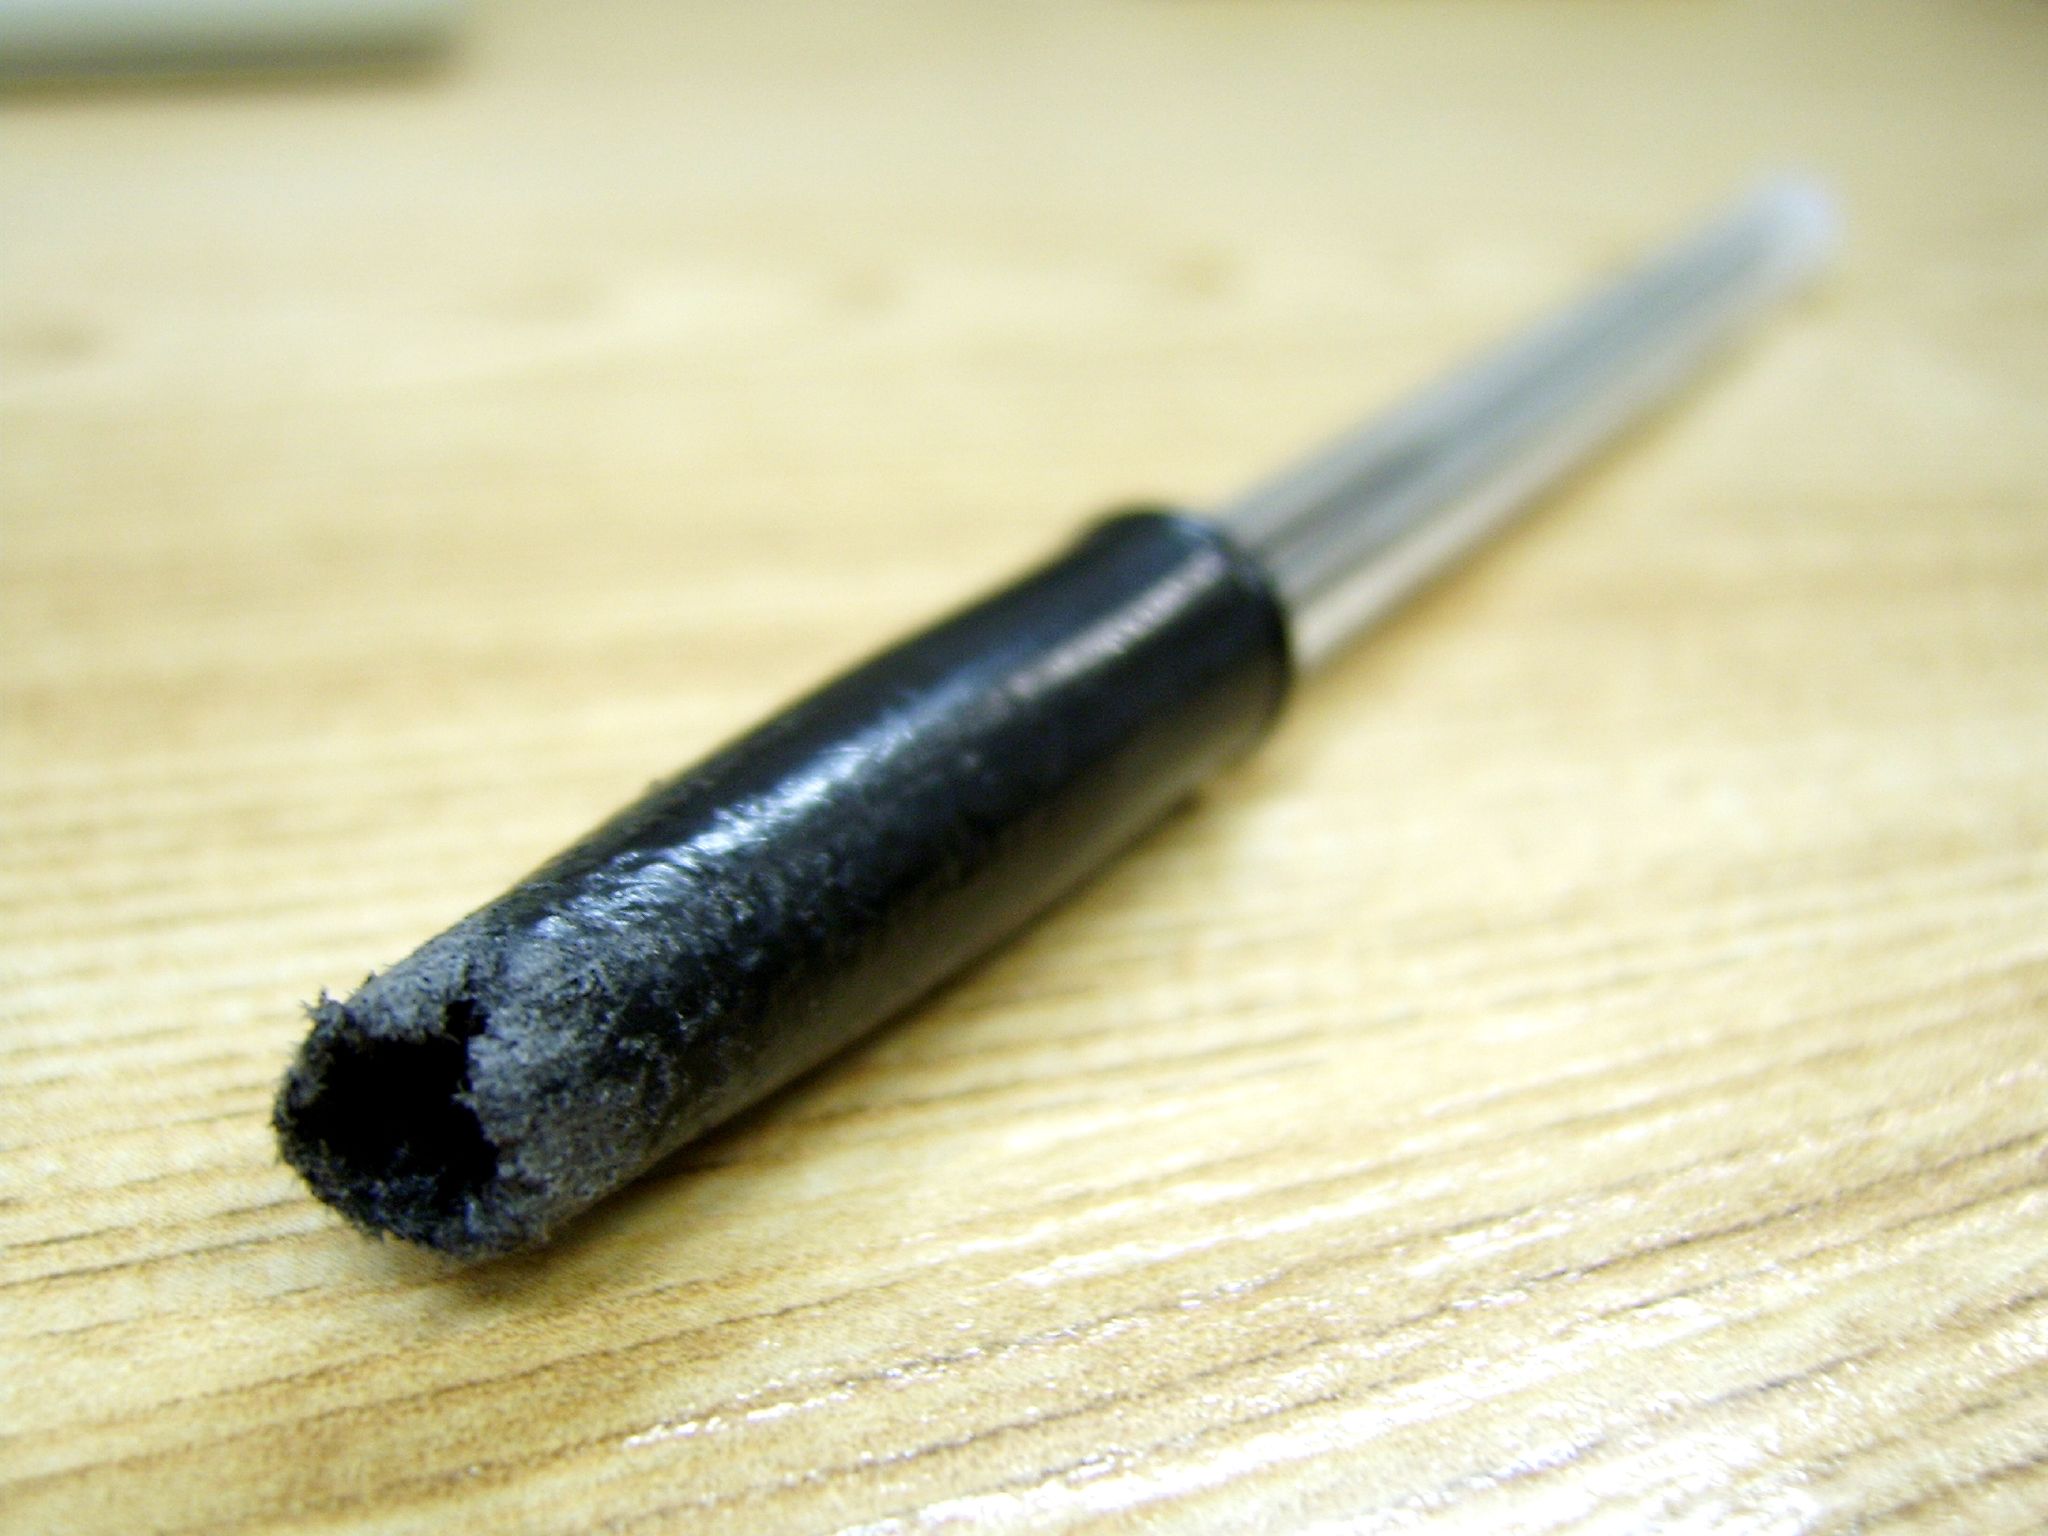 the metal tip of the wood is still covered with black residue